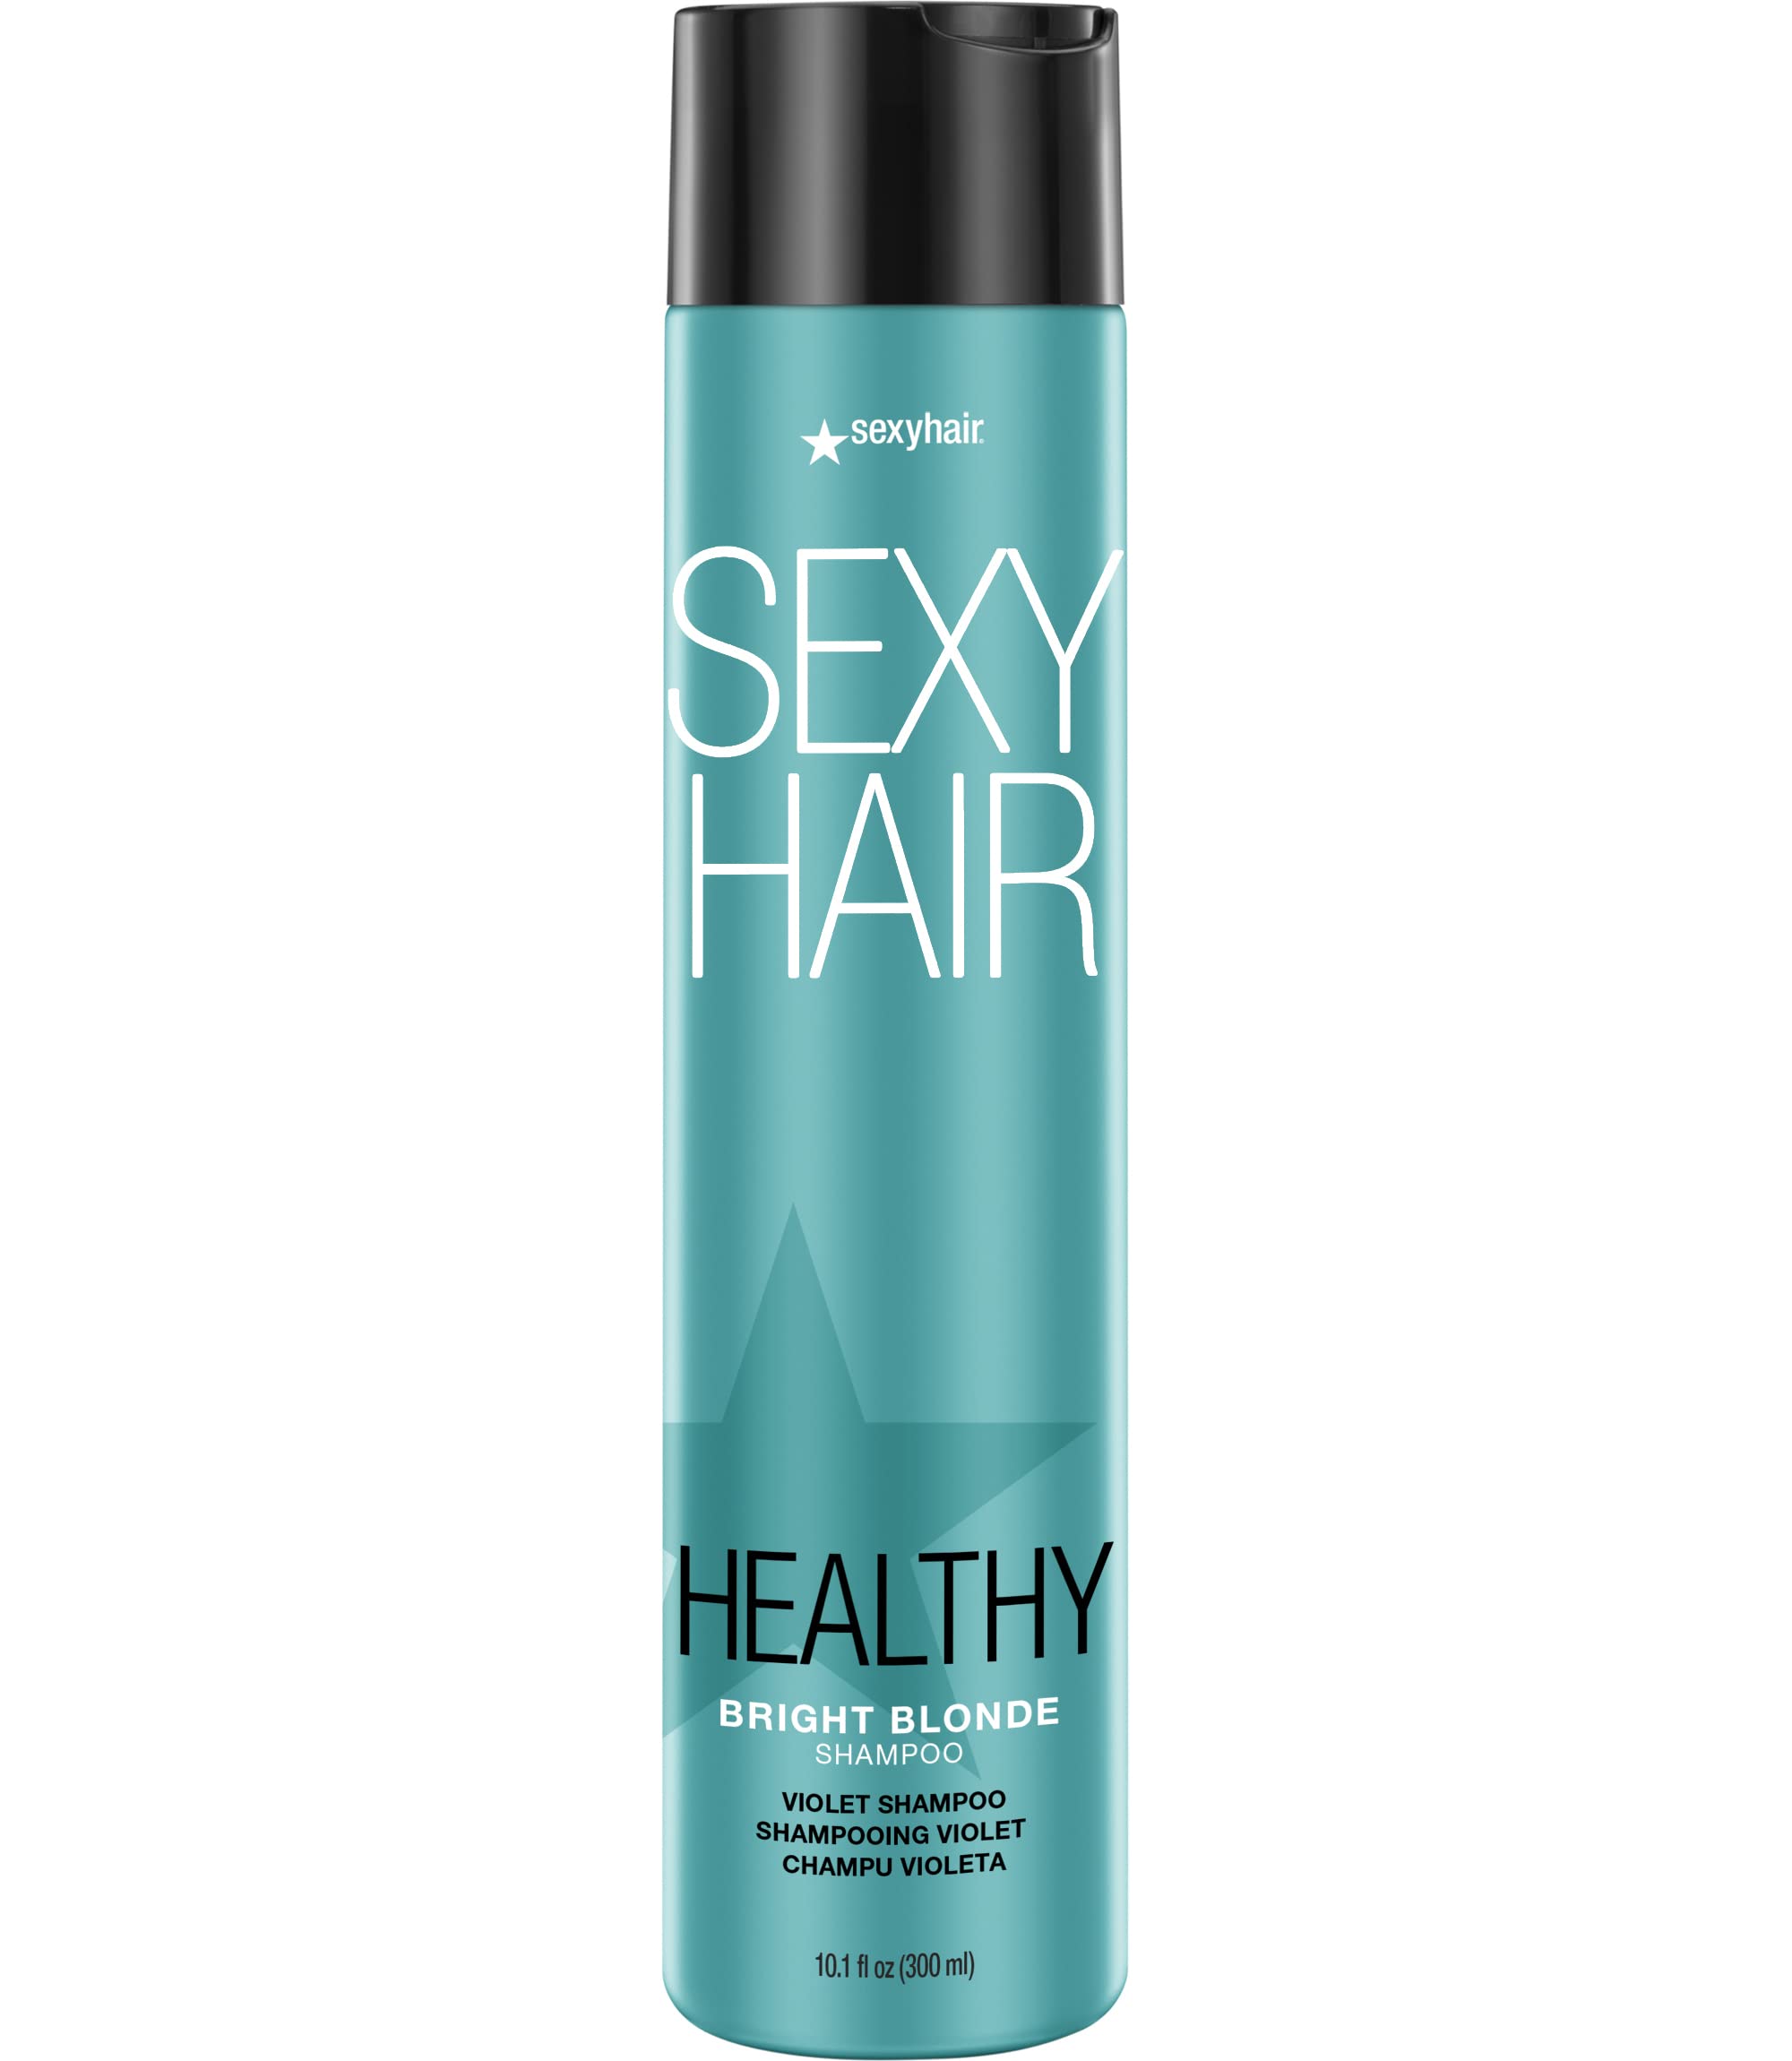 SexyHair Healthy Bright Blonde Violet Shampoo, 10.1 Oz | Helps Counteract Brassiness | SLS and SLES Sulfate Free | All Hair Types